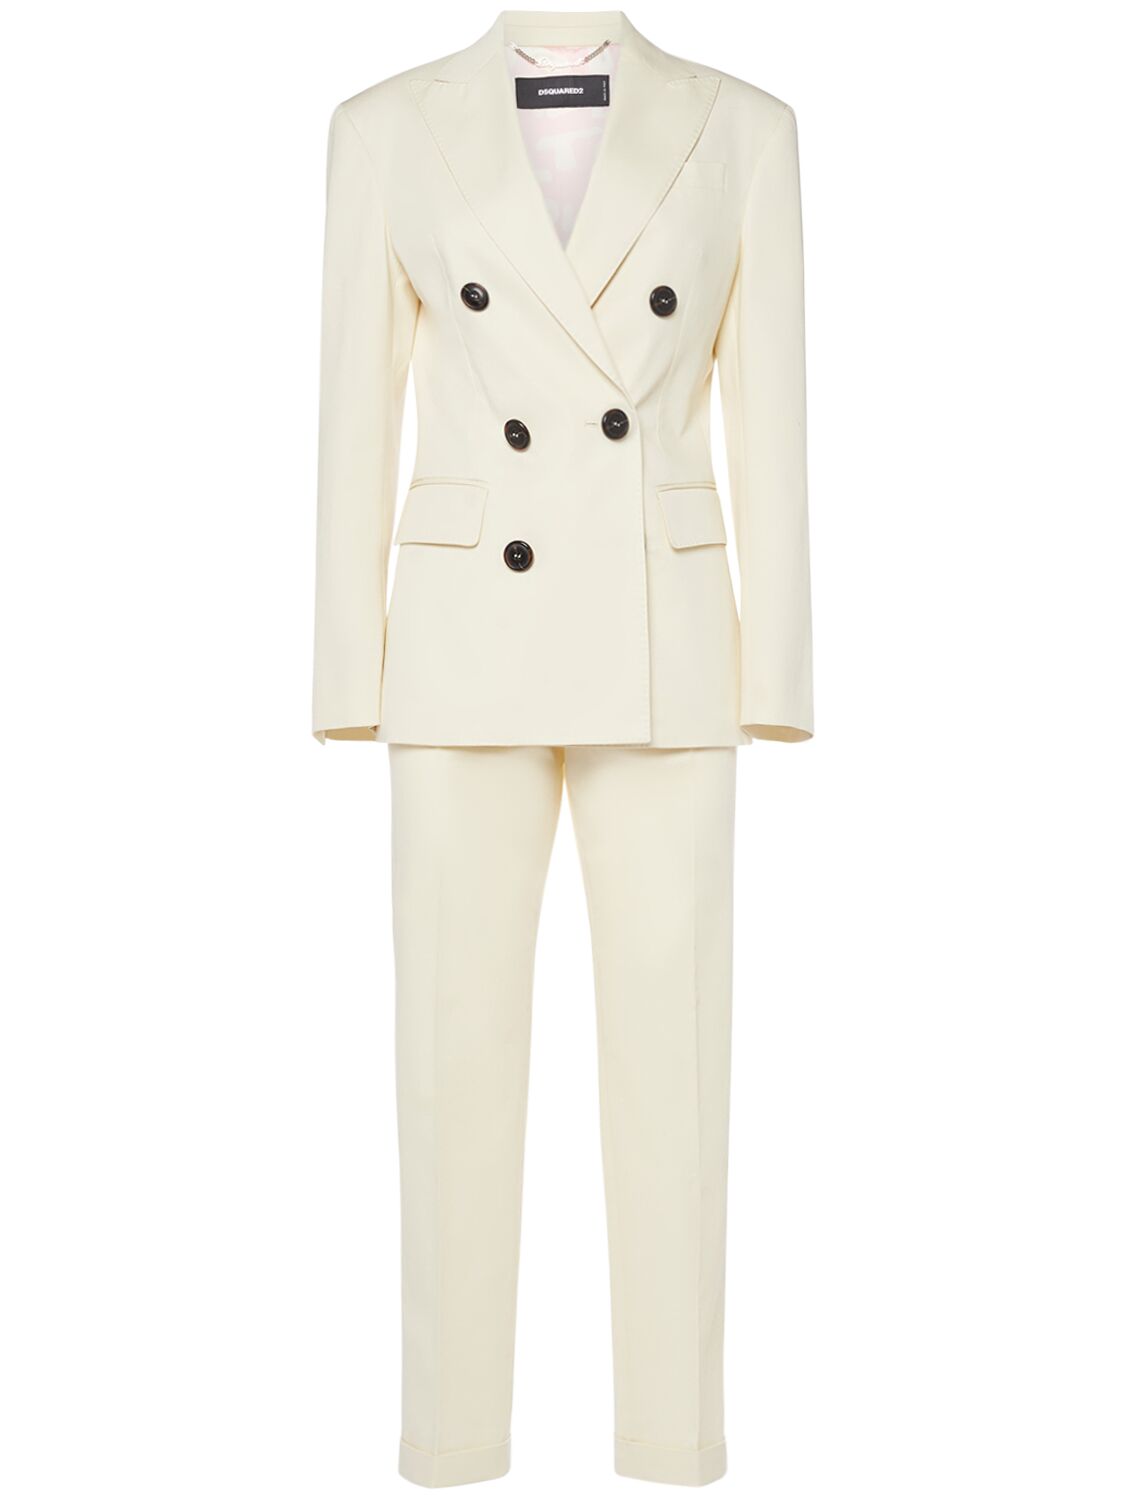 Image of Cotton Twill Suit